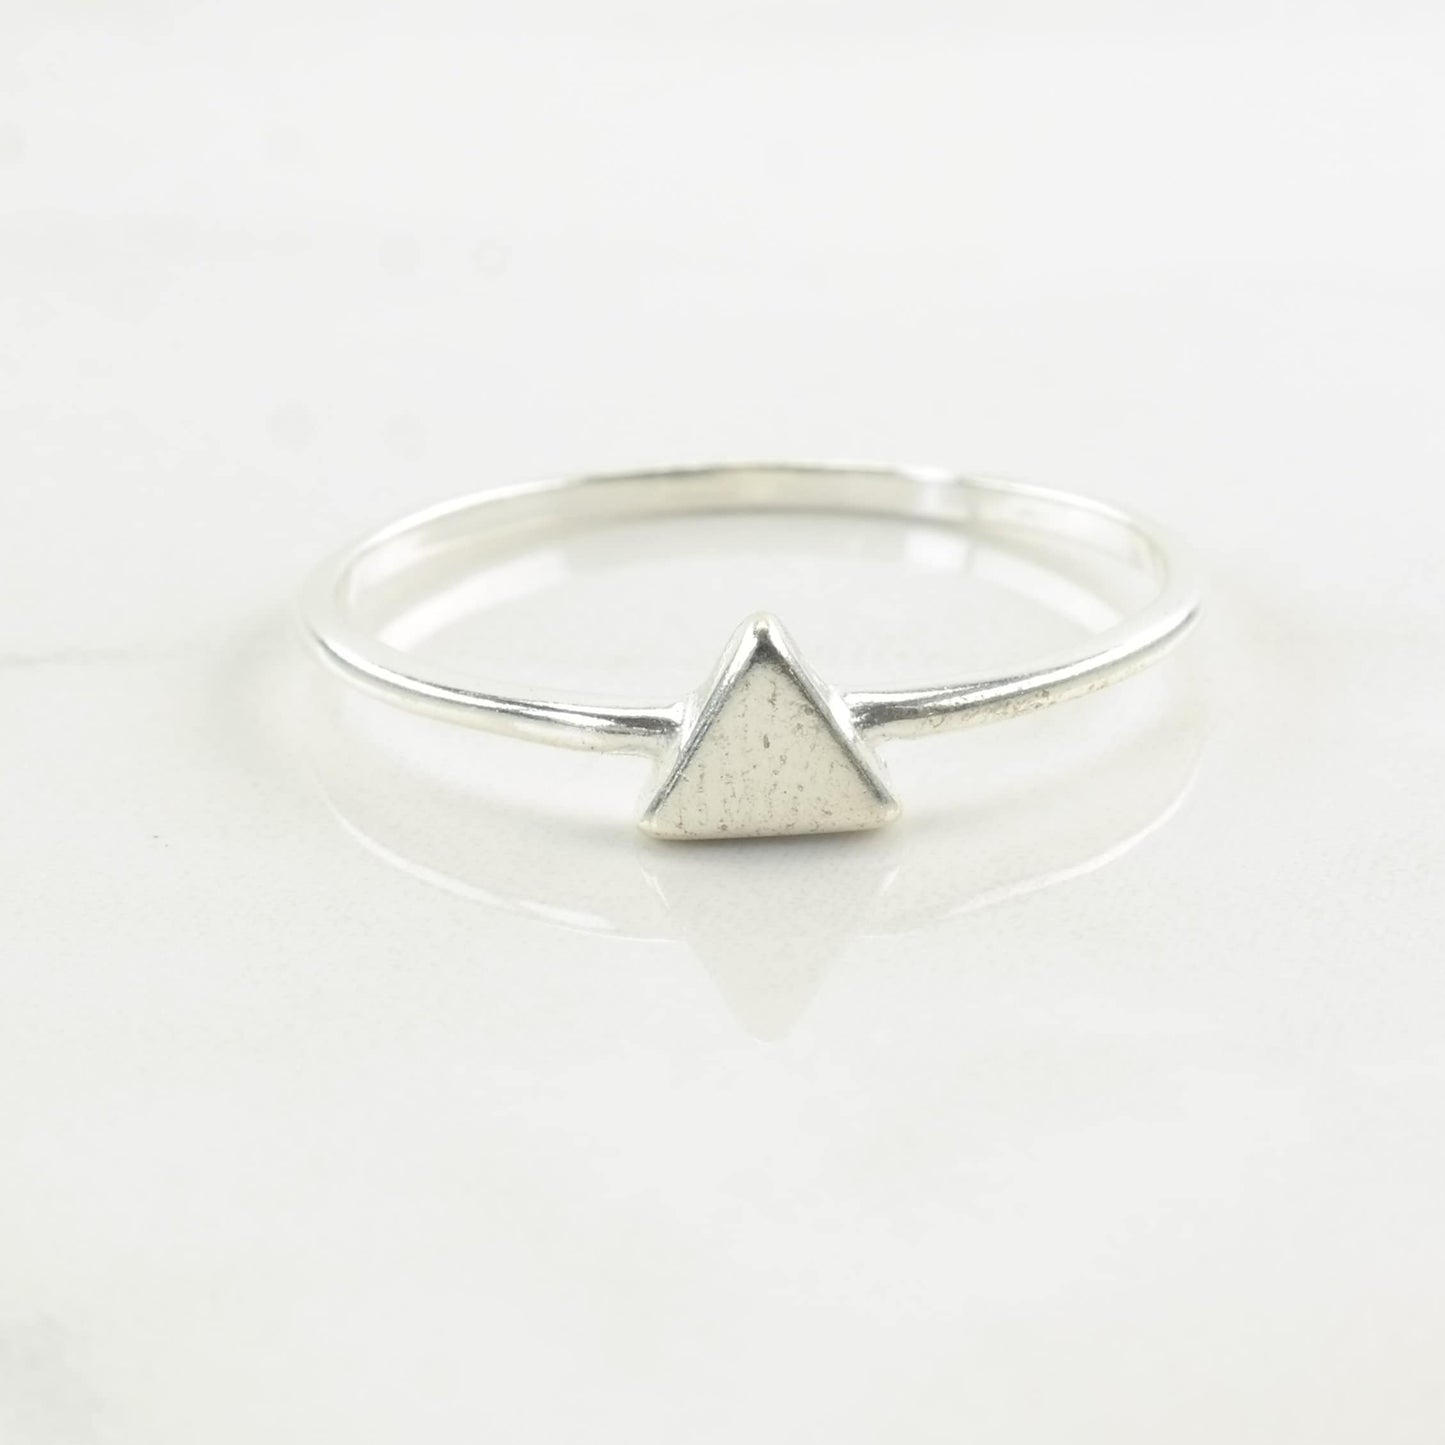 Vintage Minimalist Silver Ring Lab Opal Triangle Sterling Blue Size 6-8